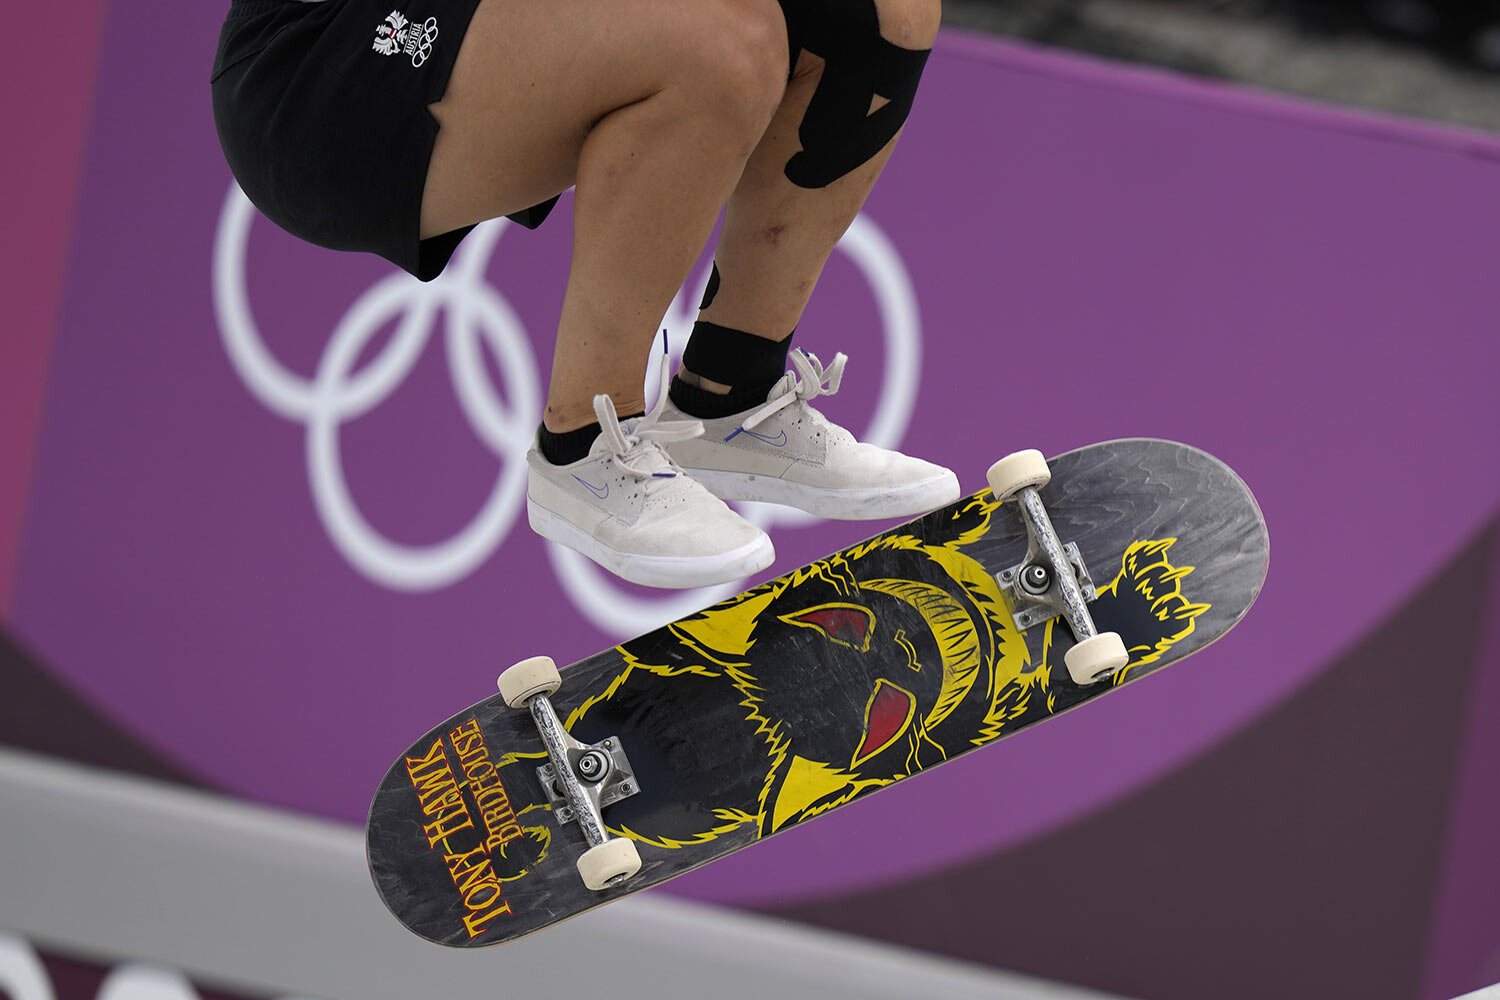  Julia Brueckler of Austria competes in the women's street skateboarding finals at the 2020 Summer Olympics, Monday, July 26, 2021, in Tokyo, Japan.(AP Photo/Ben Curtis) 